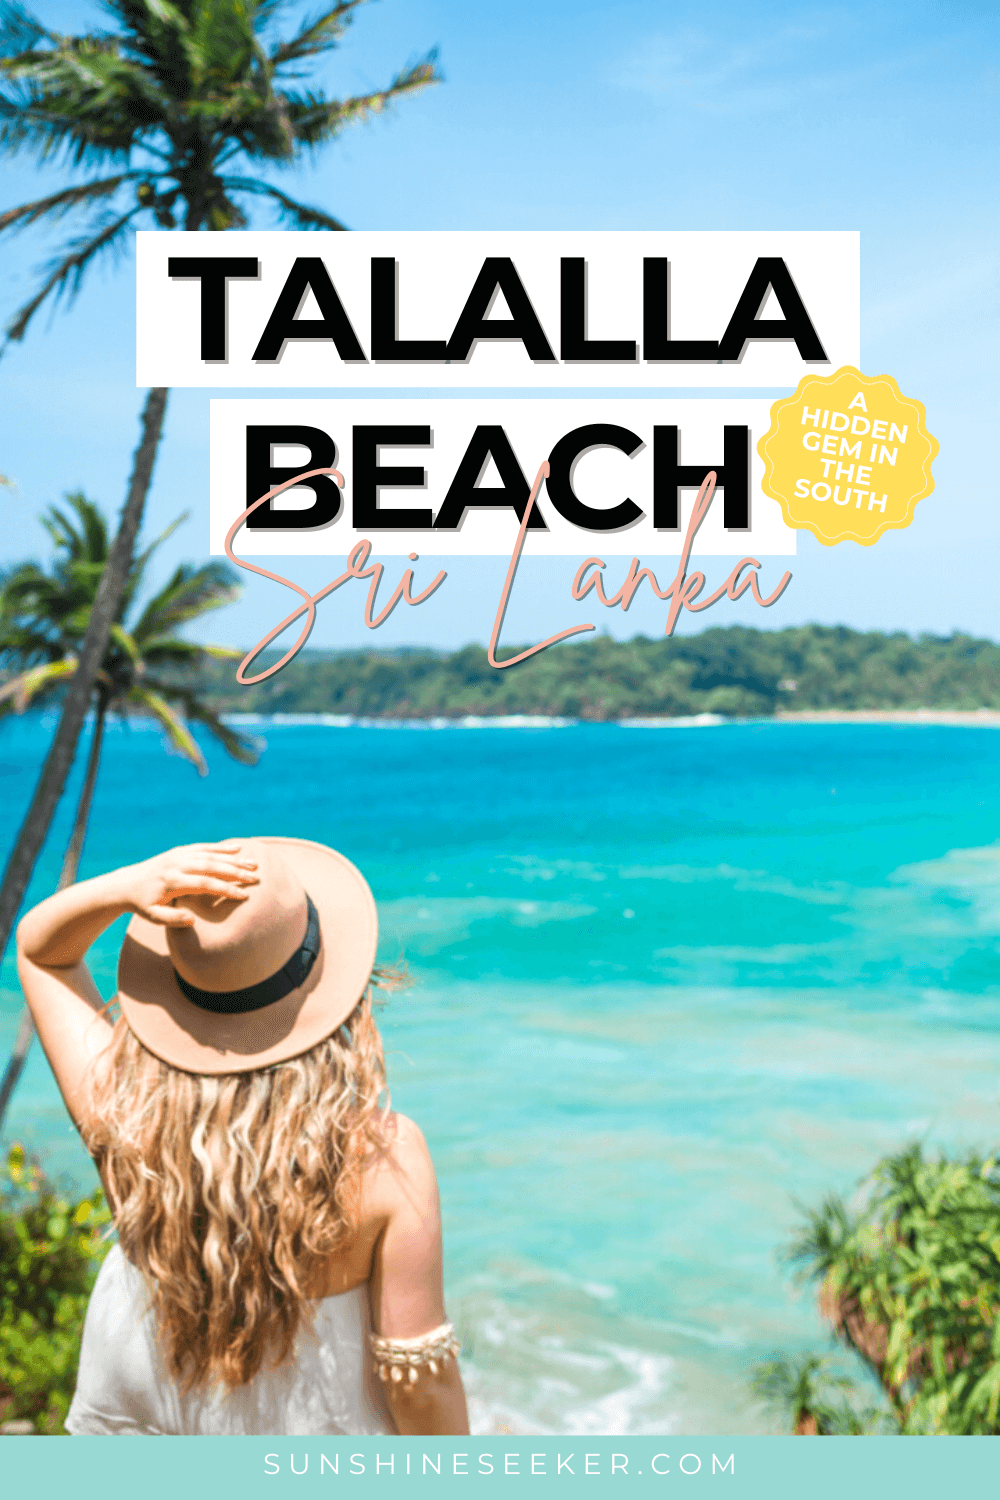 A complete guide to Talalla Beach, a hidden gem in the south of Sri Lanka. 